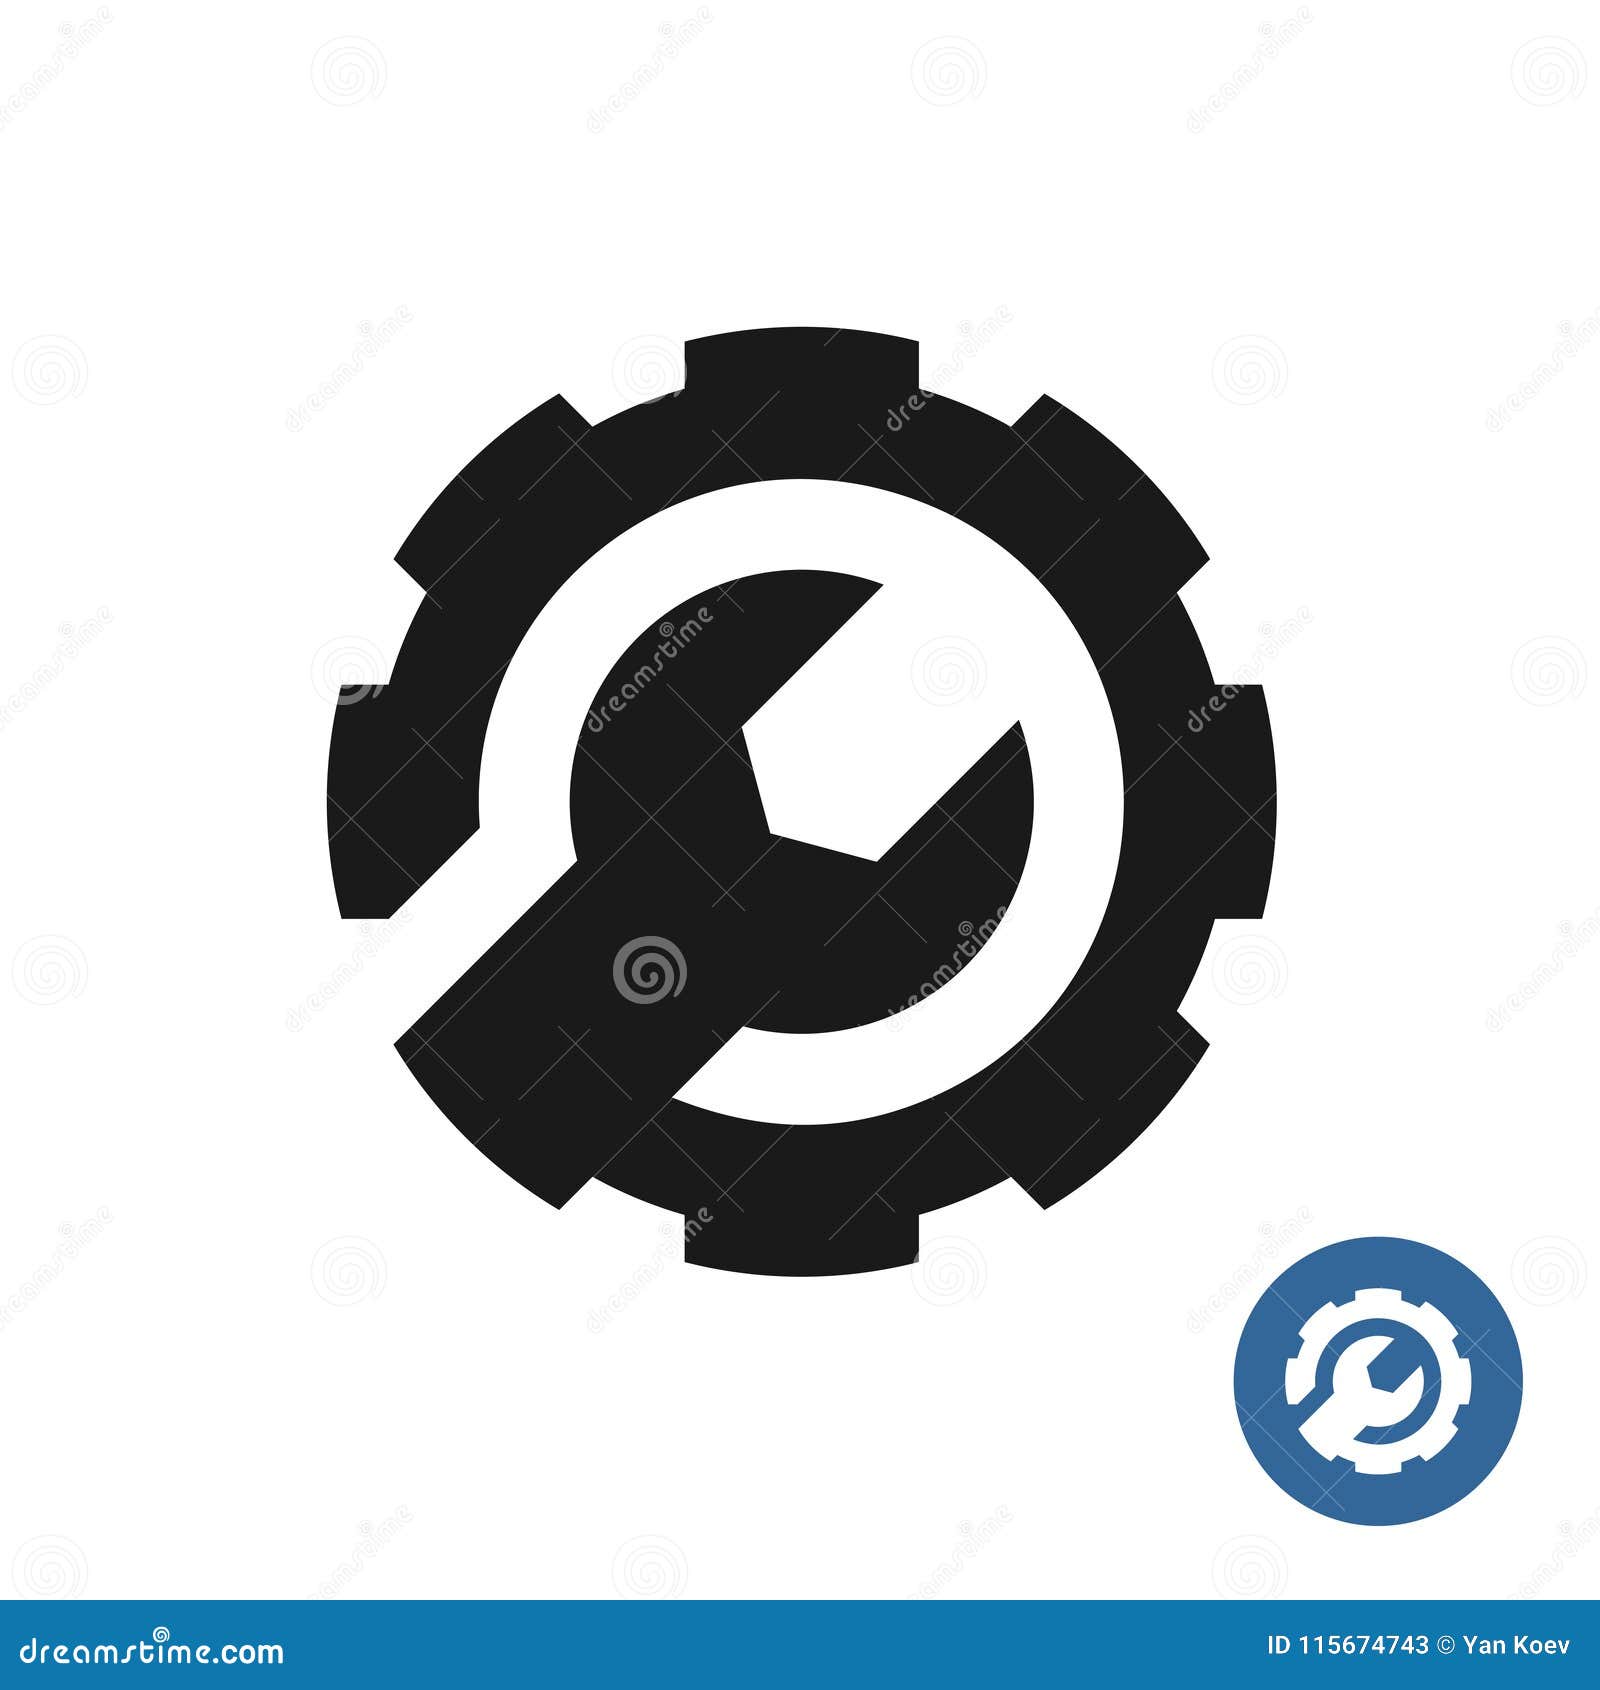 gear and wrench icon. service support logo.